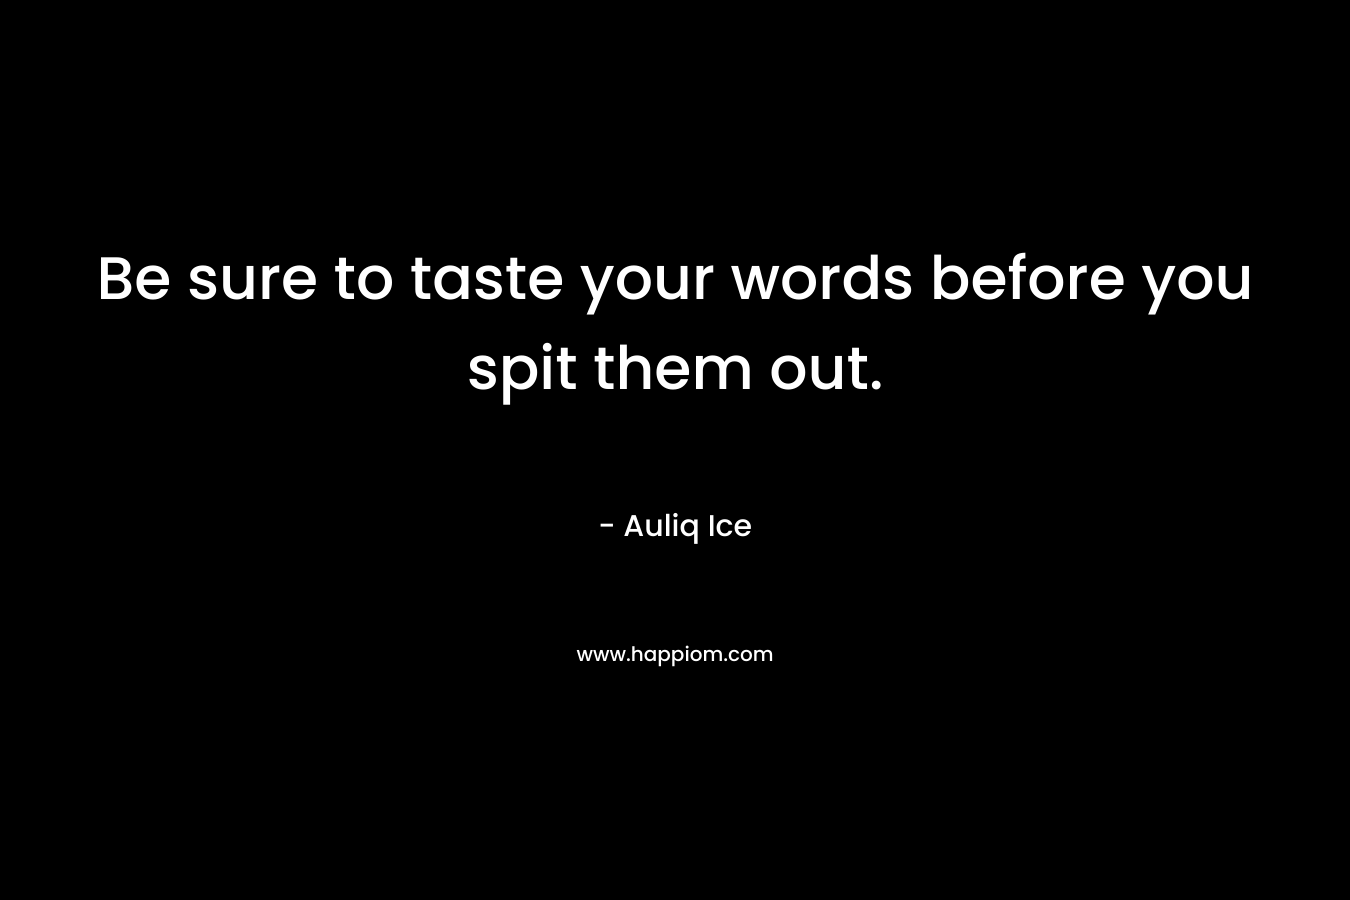 Be sure to taste your words before you spit them out. – Auliq Ice